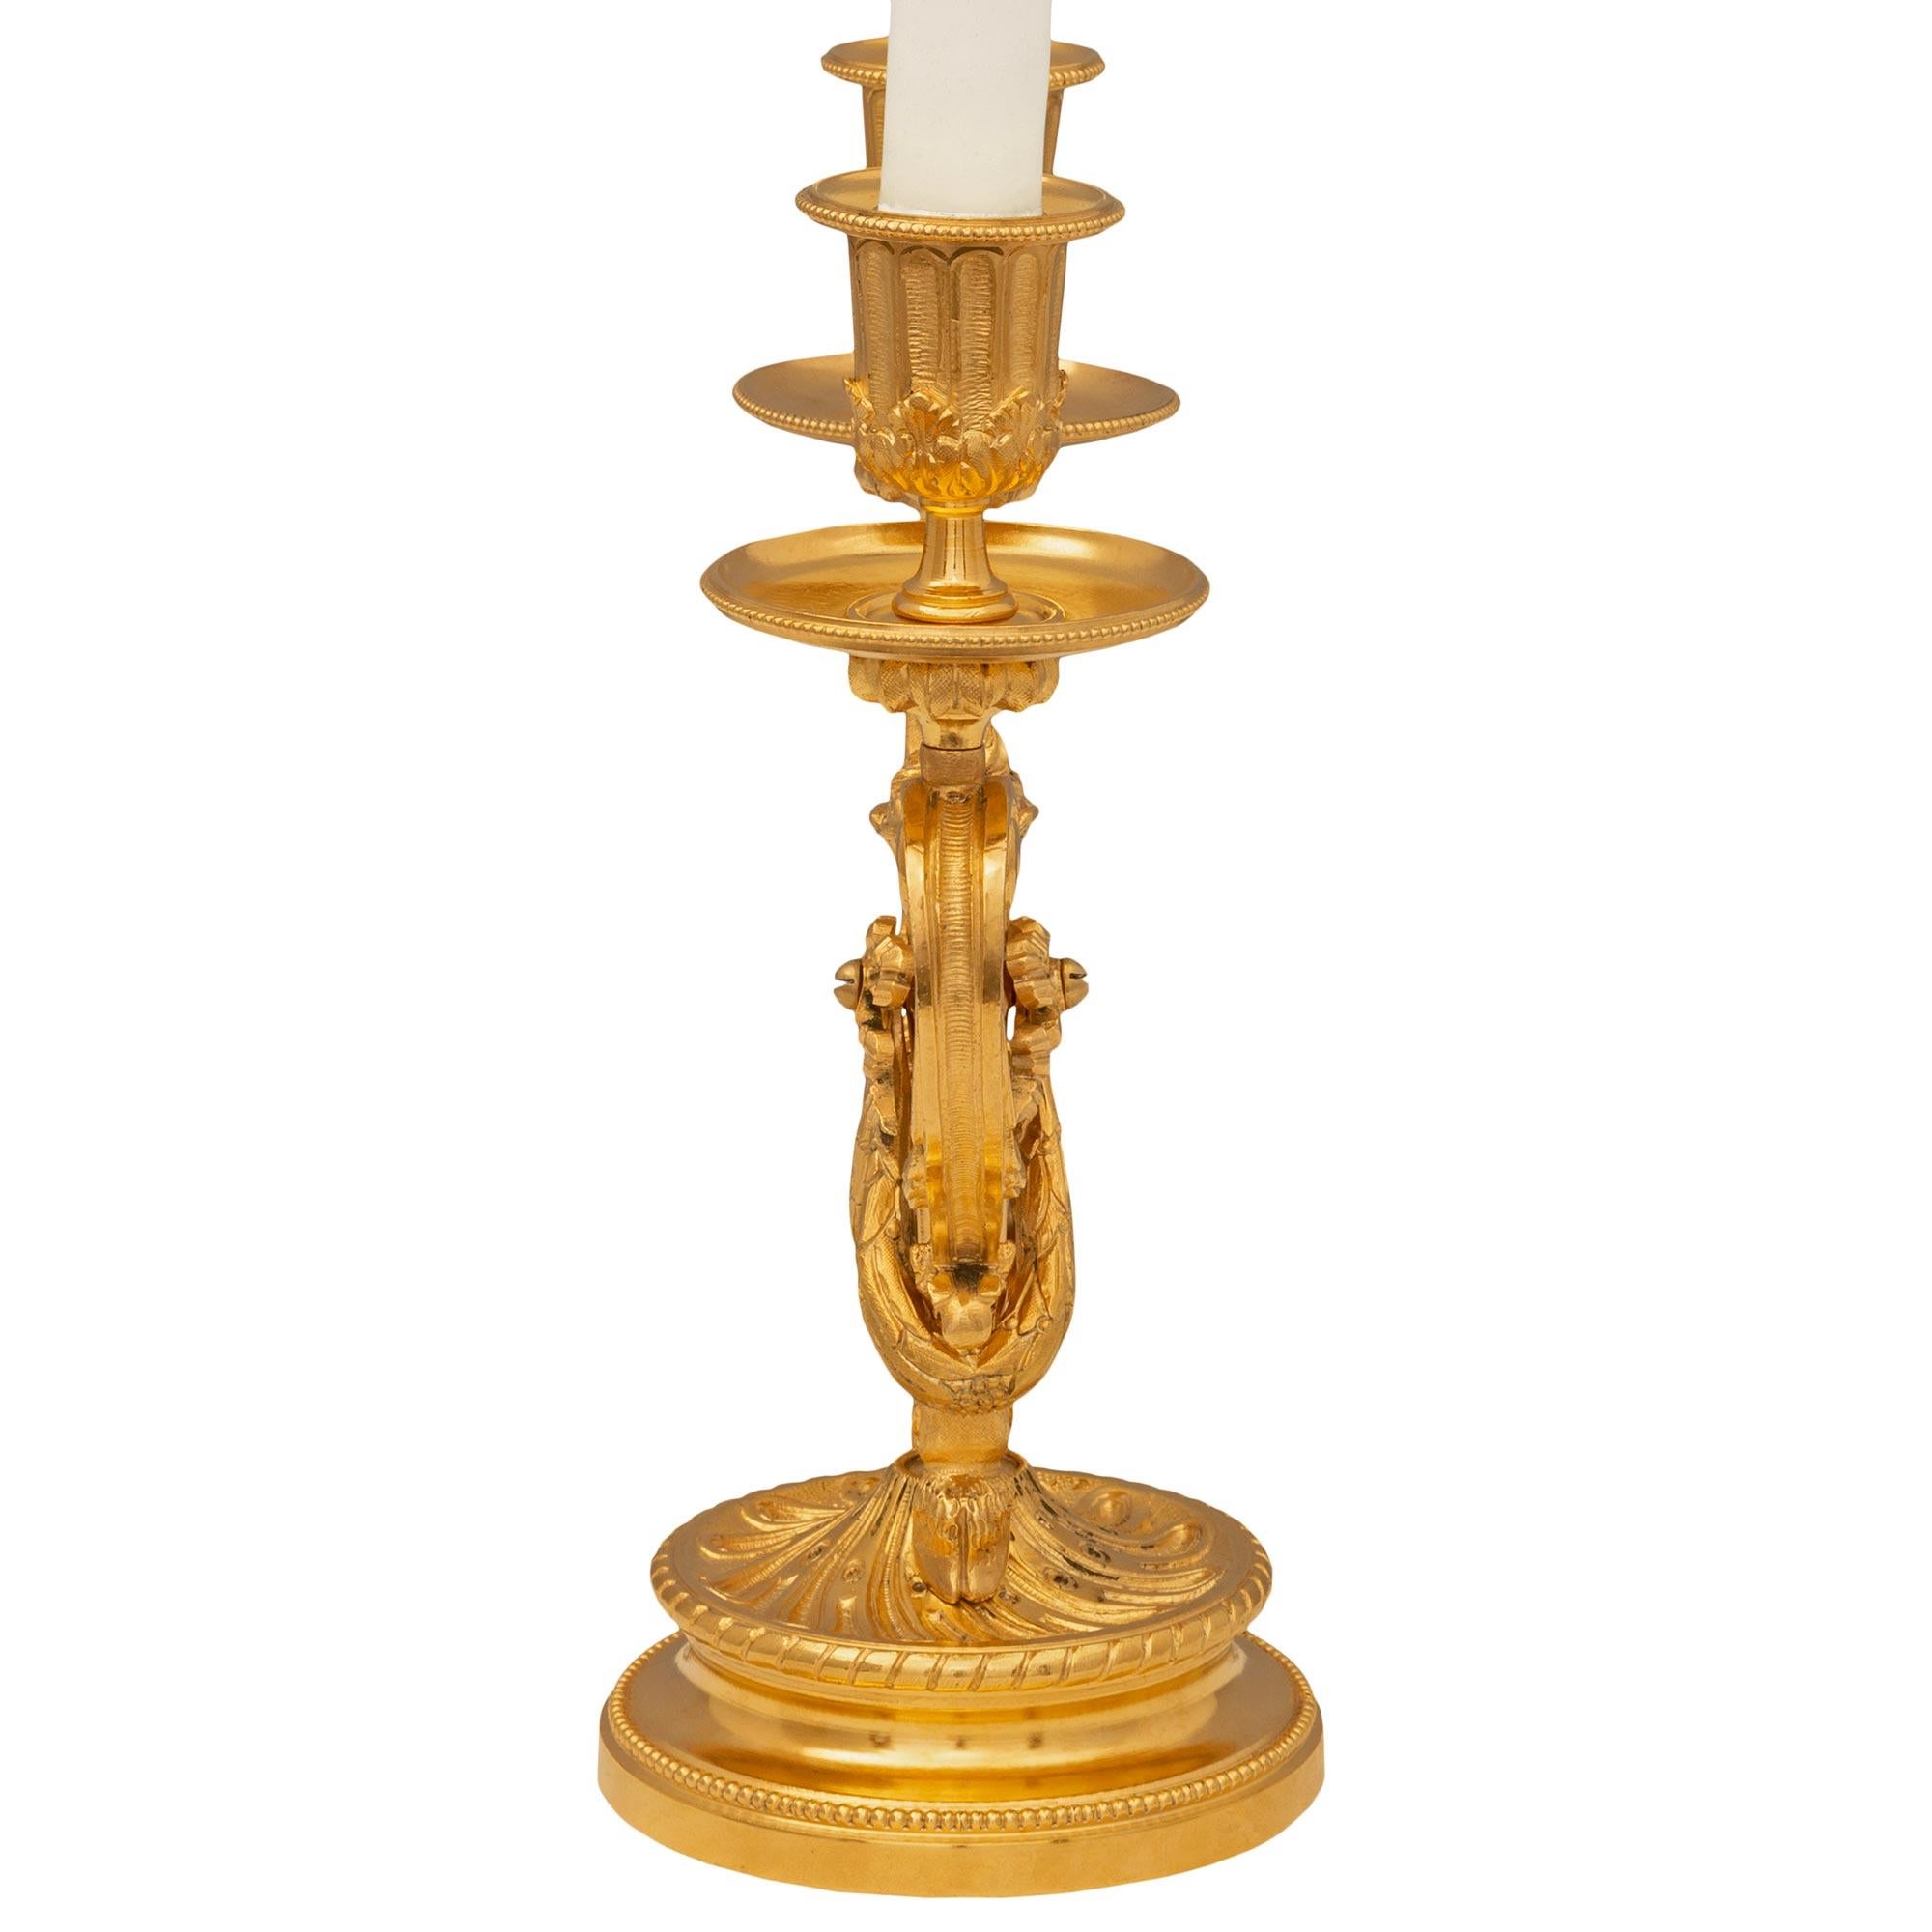 Pair Of French 19th Century Louis XVI St. Ormolu Candelabras In Good Condition For Sale In West Palm Beach, FL